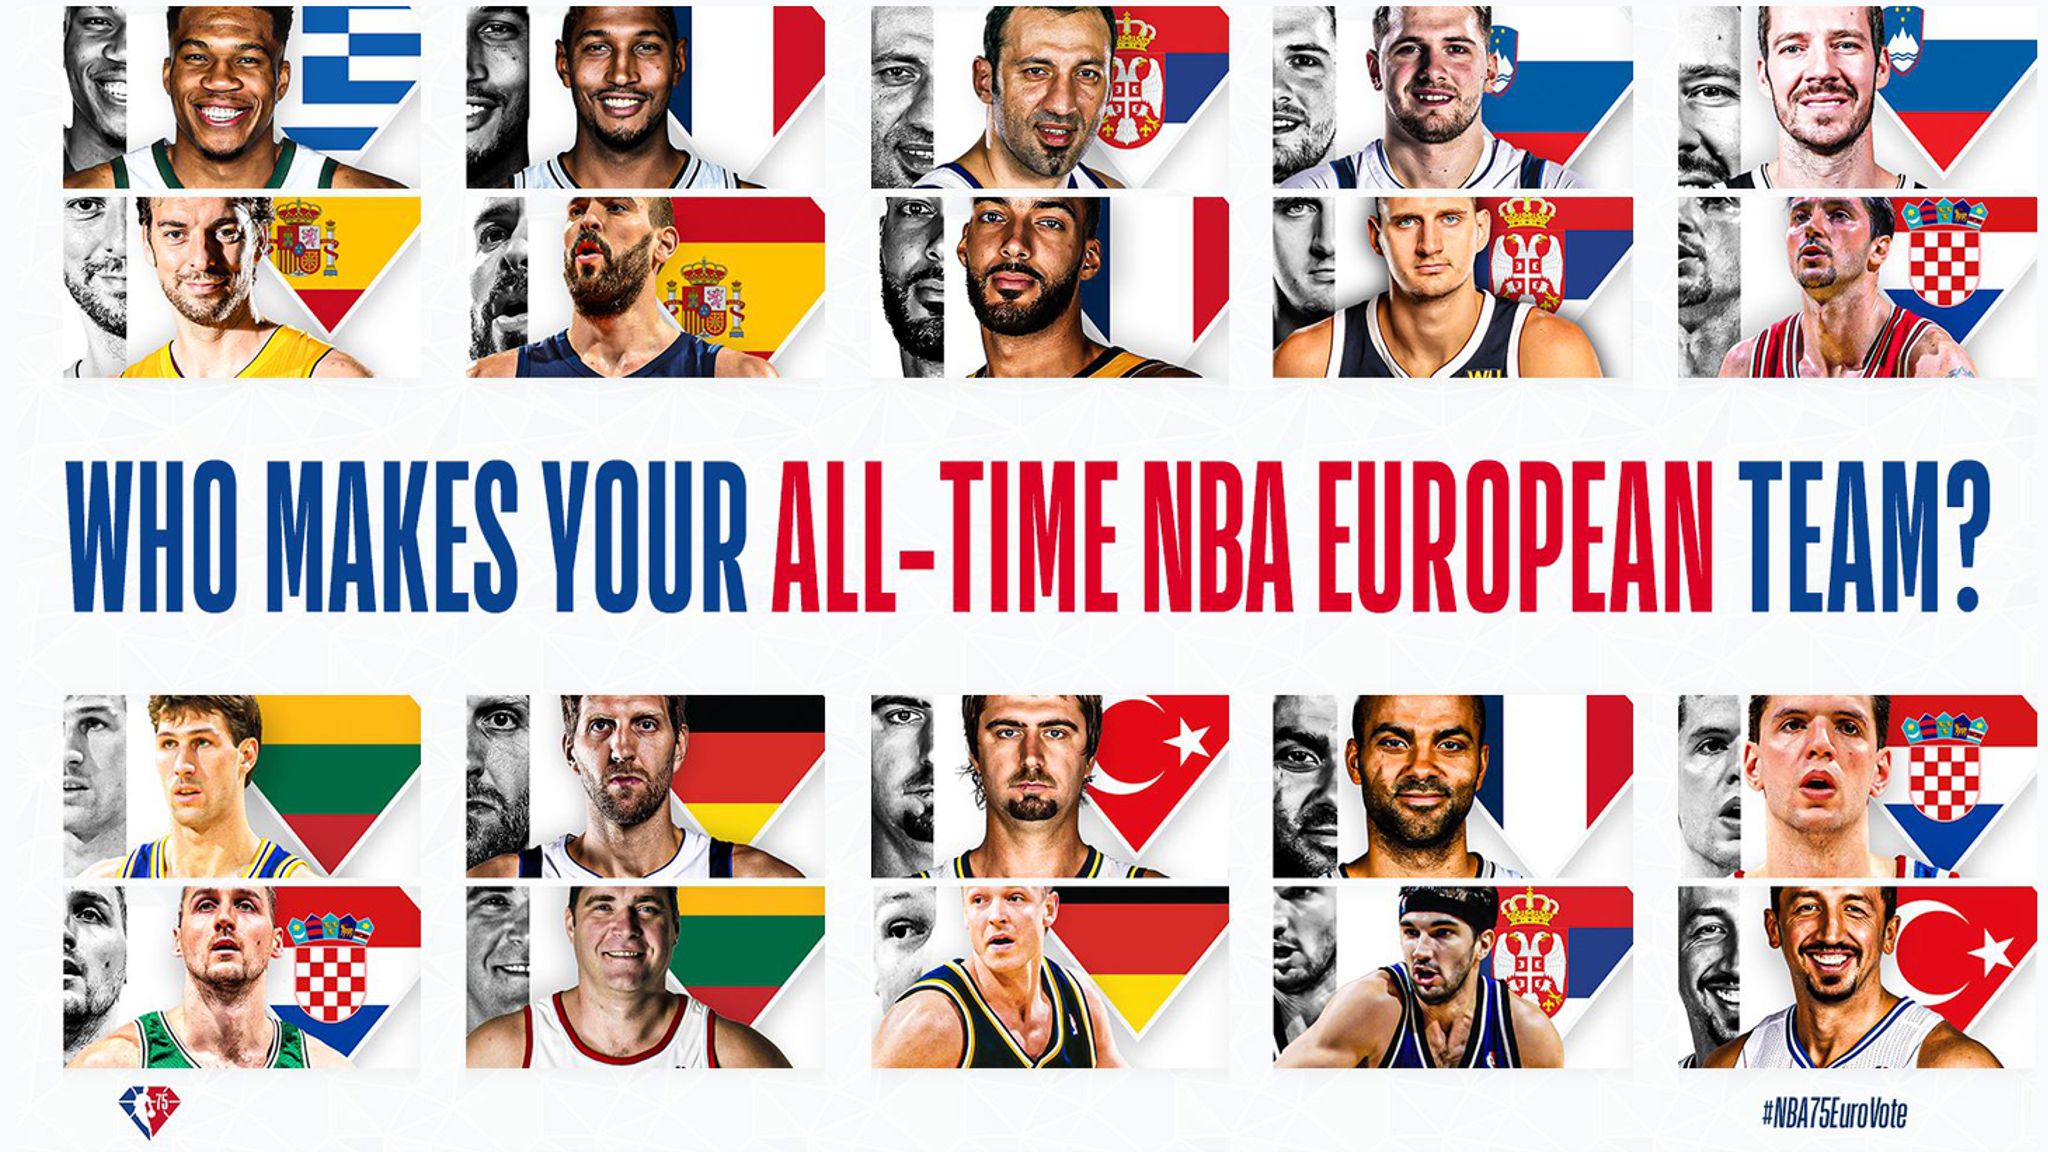 Top 10 Alltime NBA European stars Vote for the best Euro players in